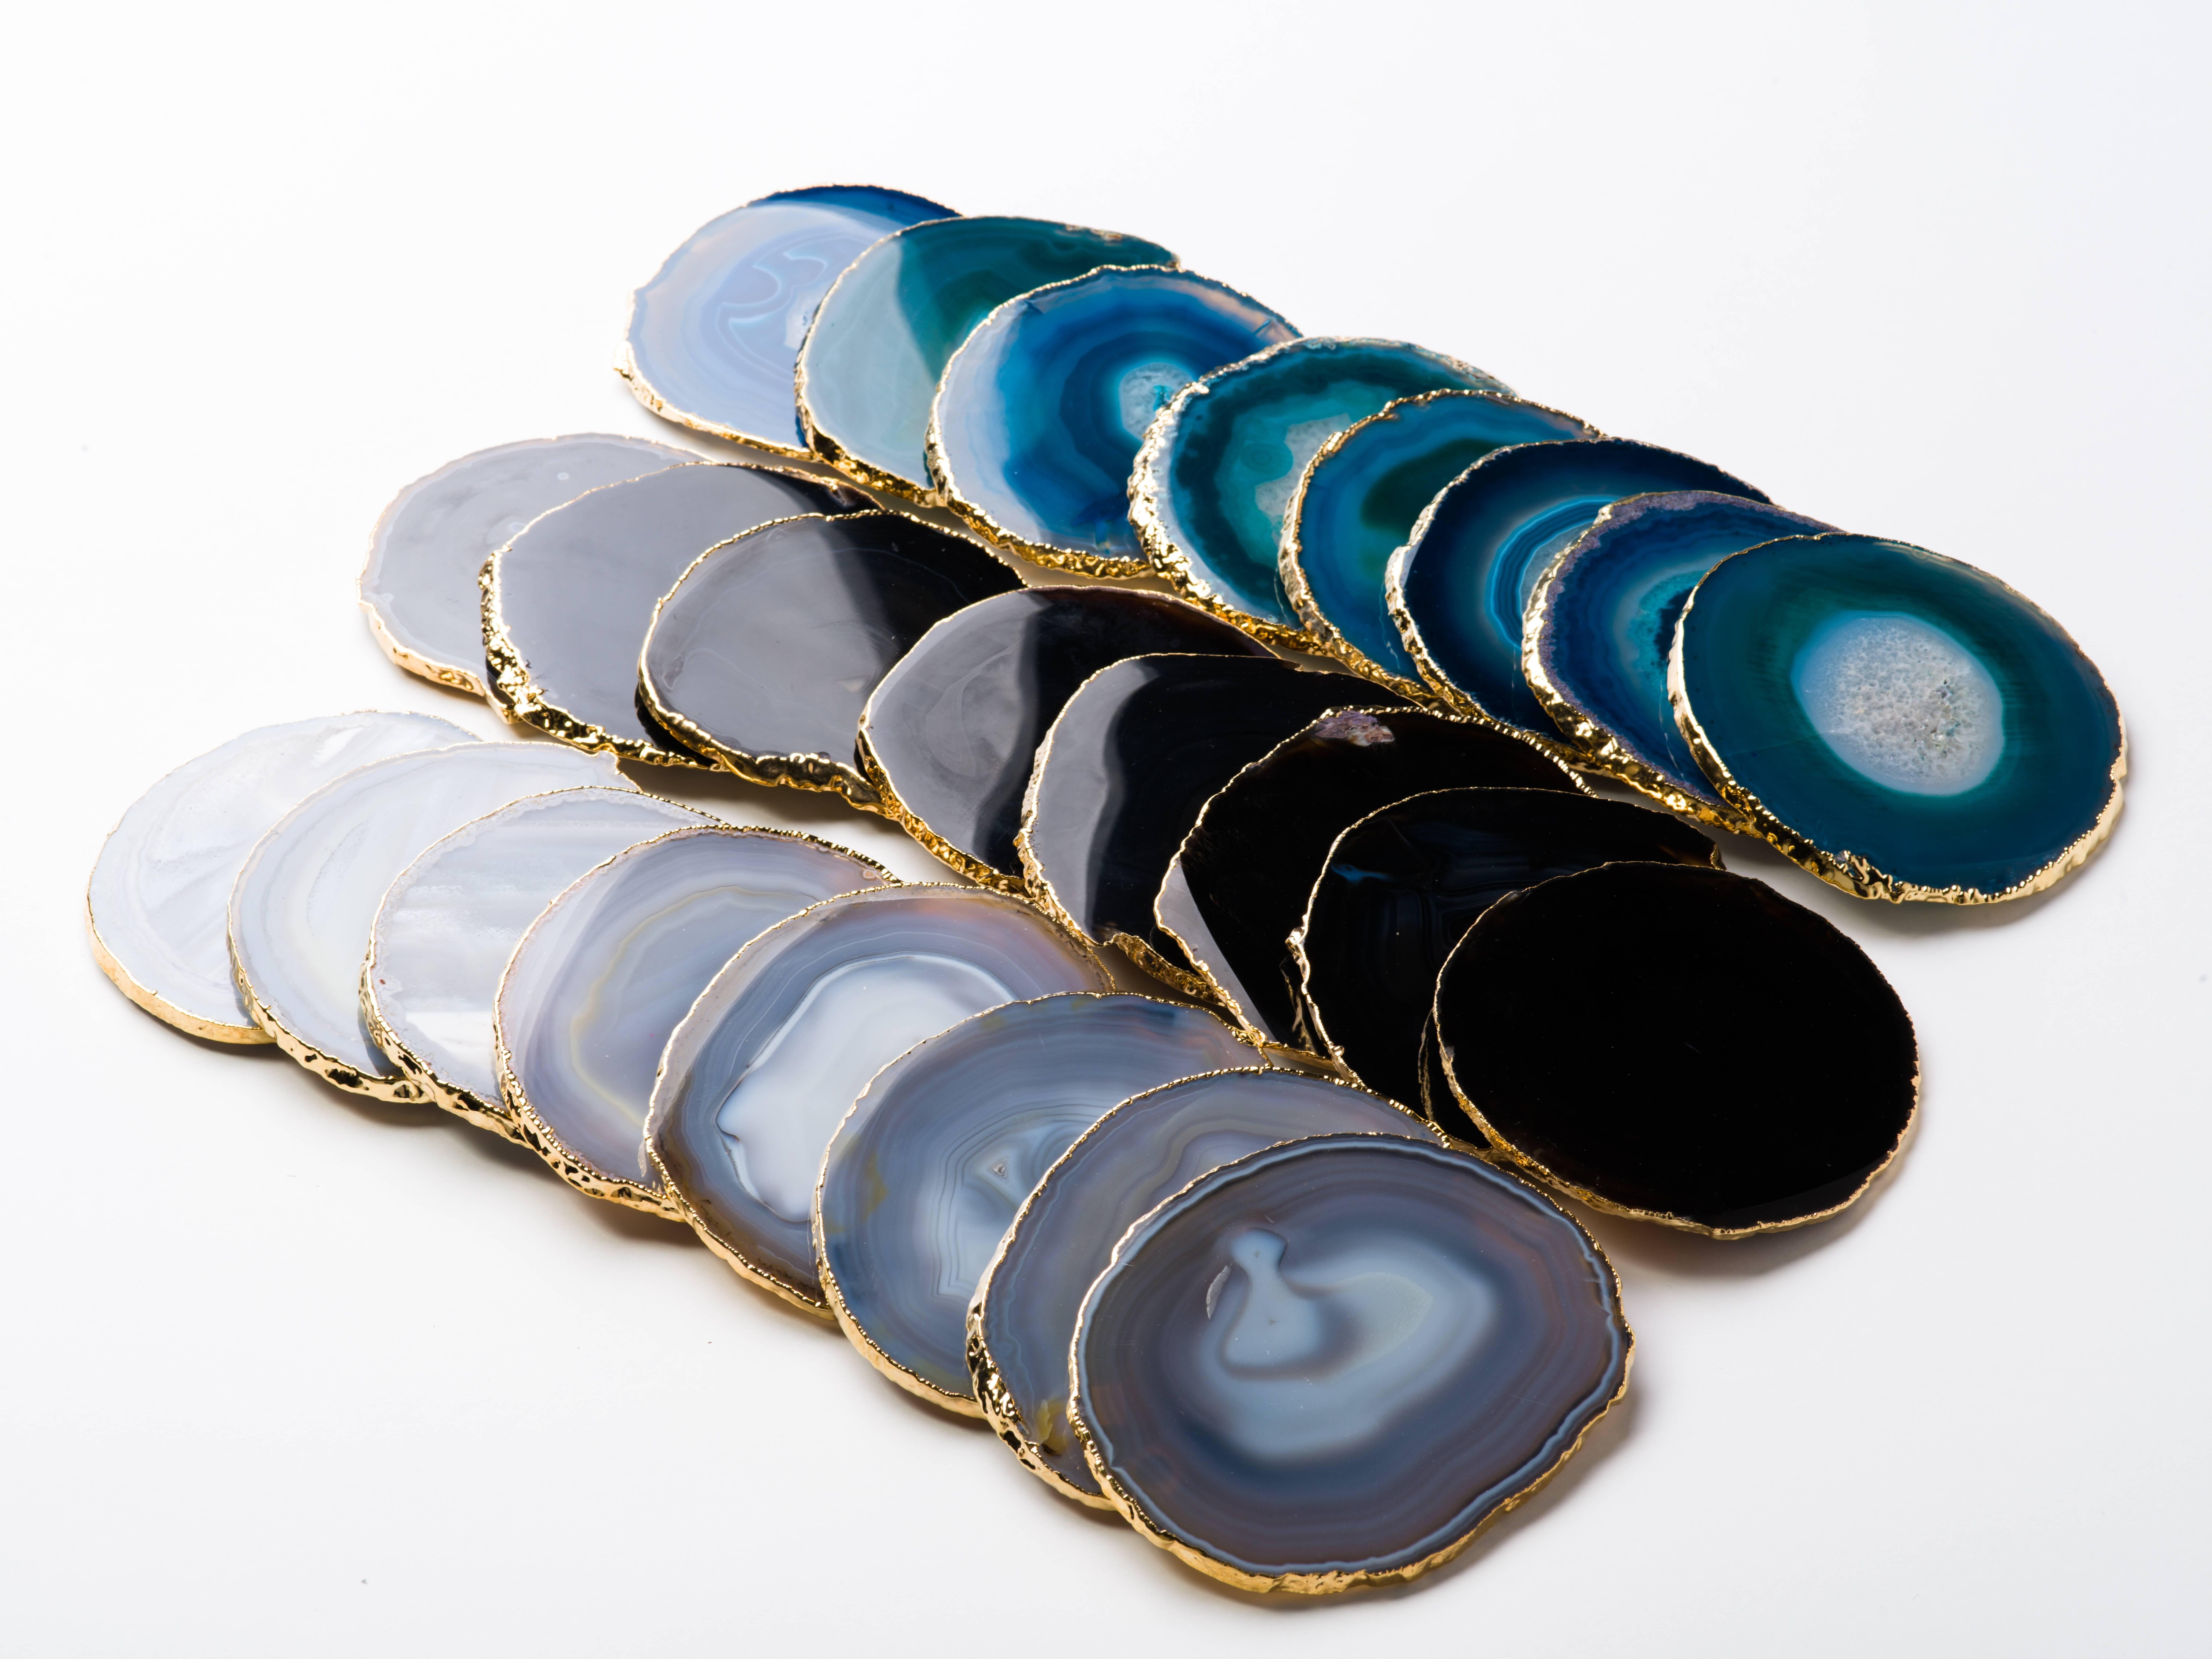 Contemporary Set of Eight Semi-Precious Gemstone Coasters in Teal Wrapped in 24-Karat Gold